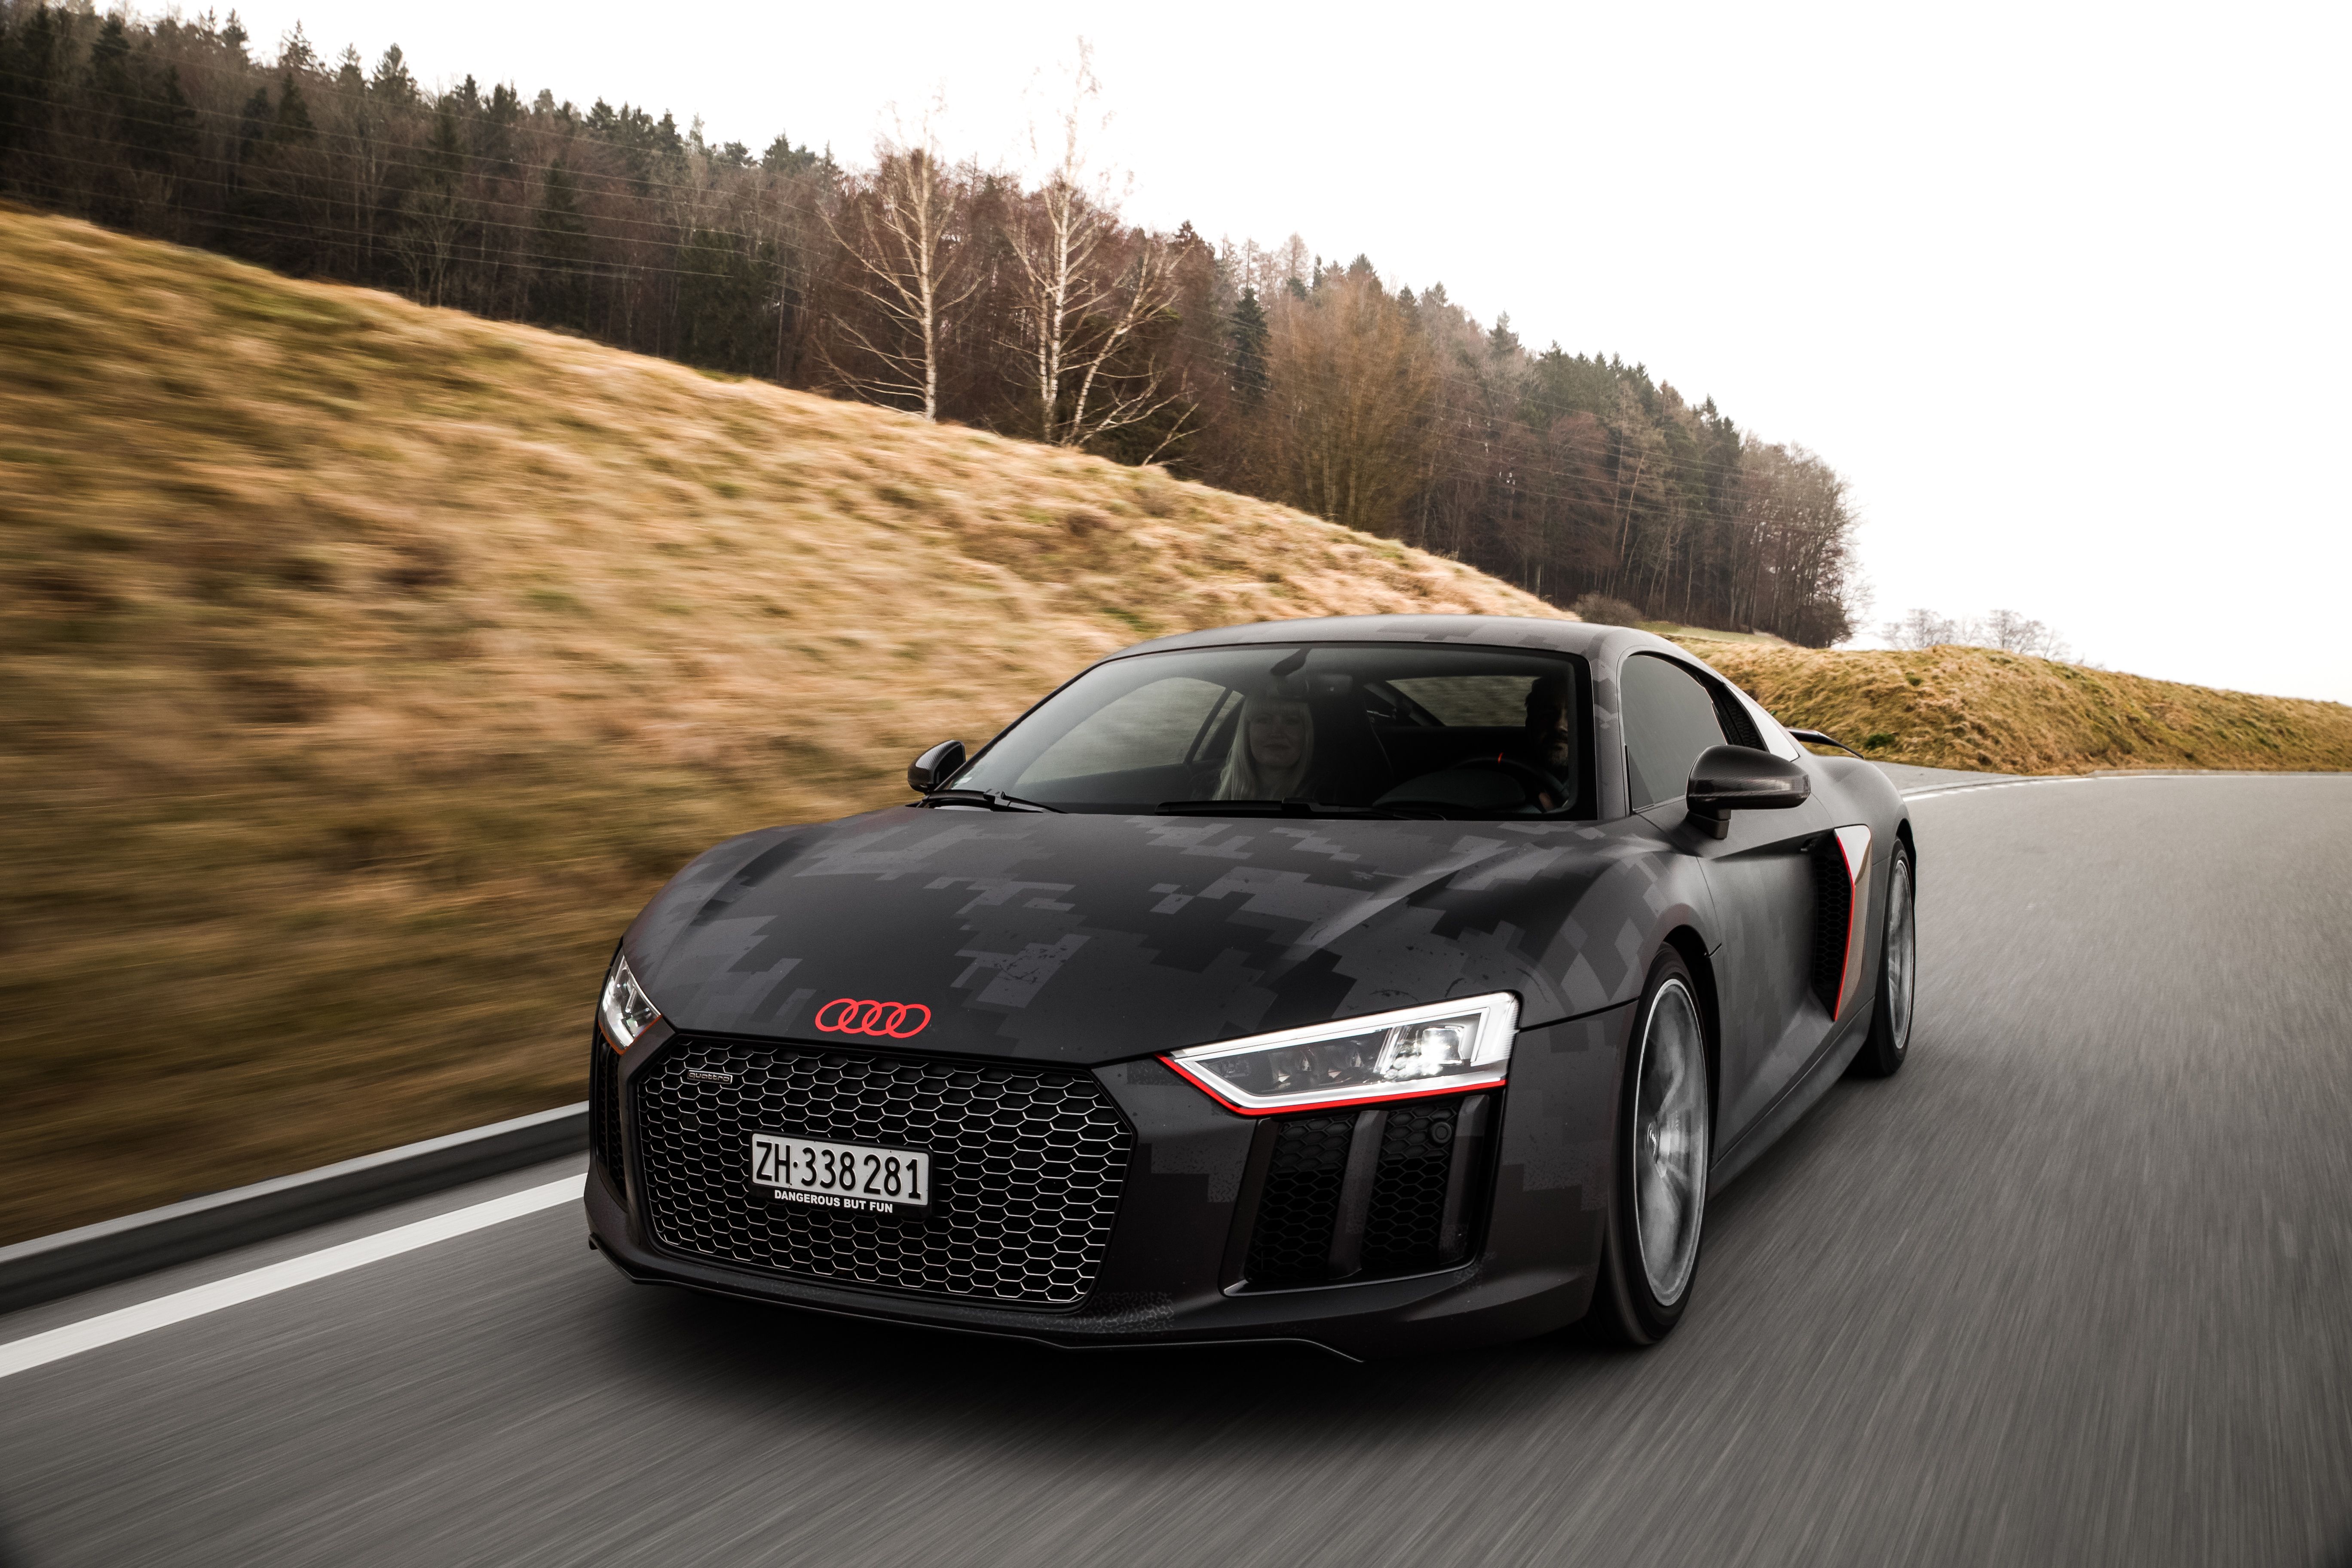 Black Audi R8 V10 Plus iPad Air HD 4k Wallpaper, Image, Background, Photo and Picture